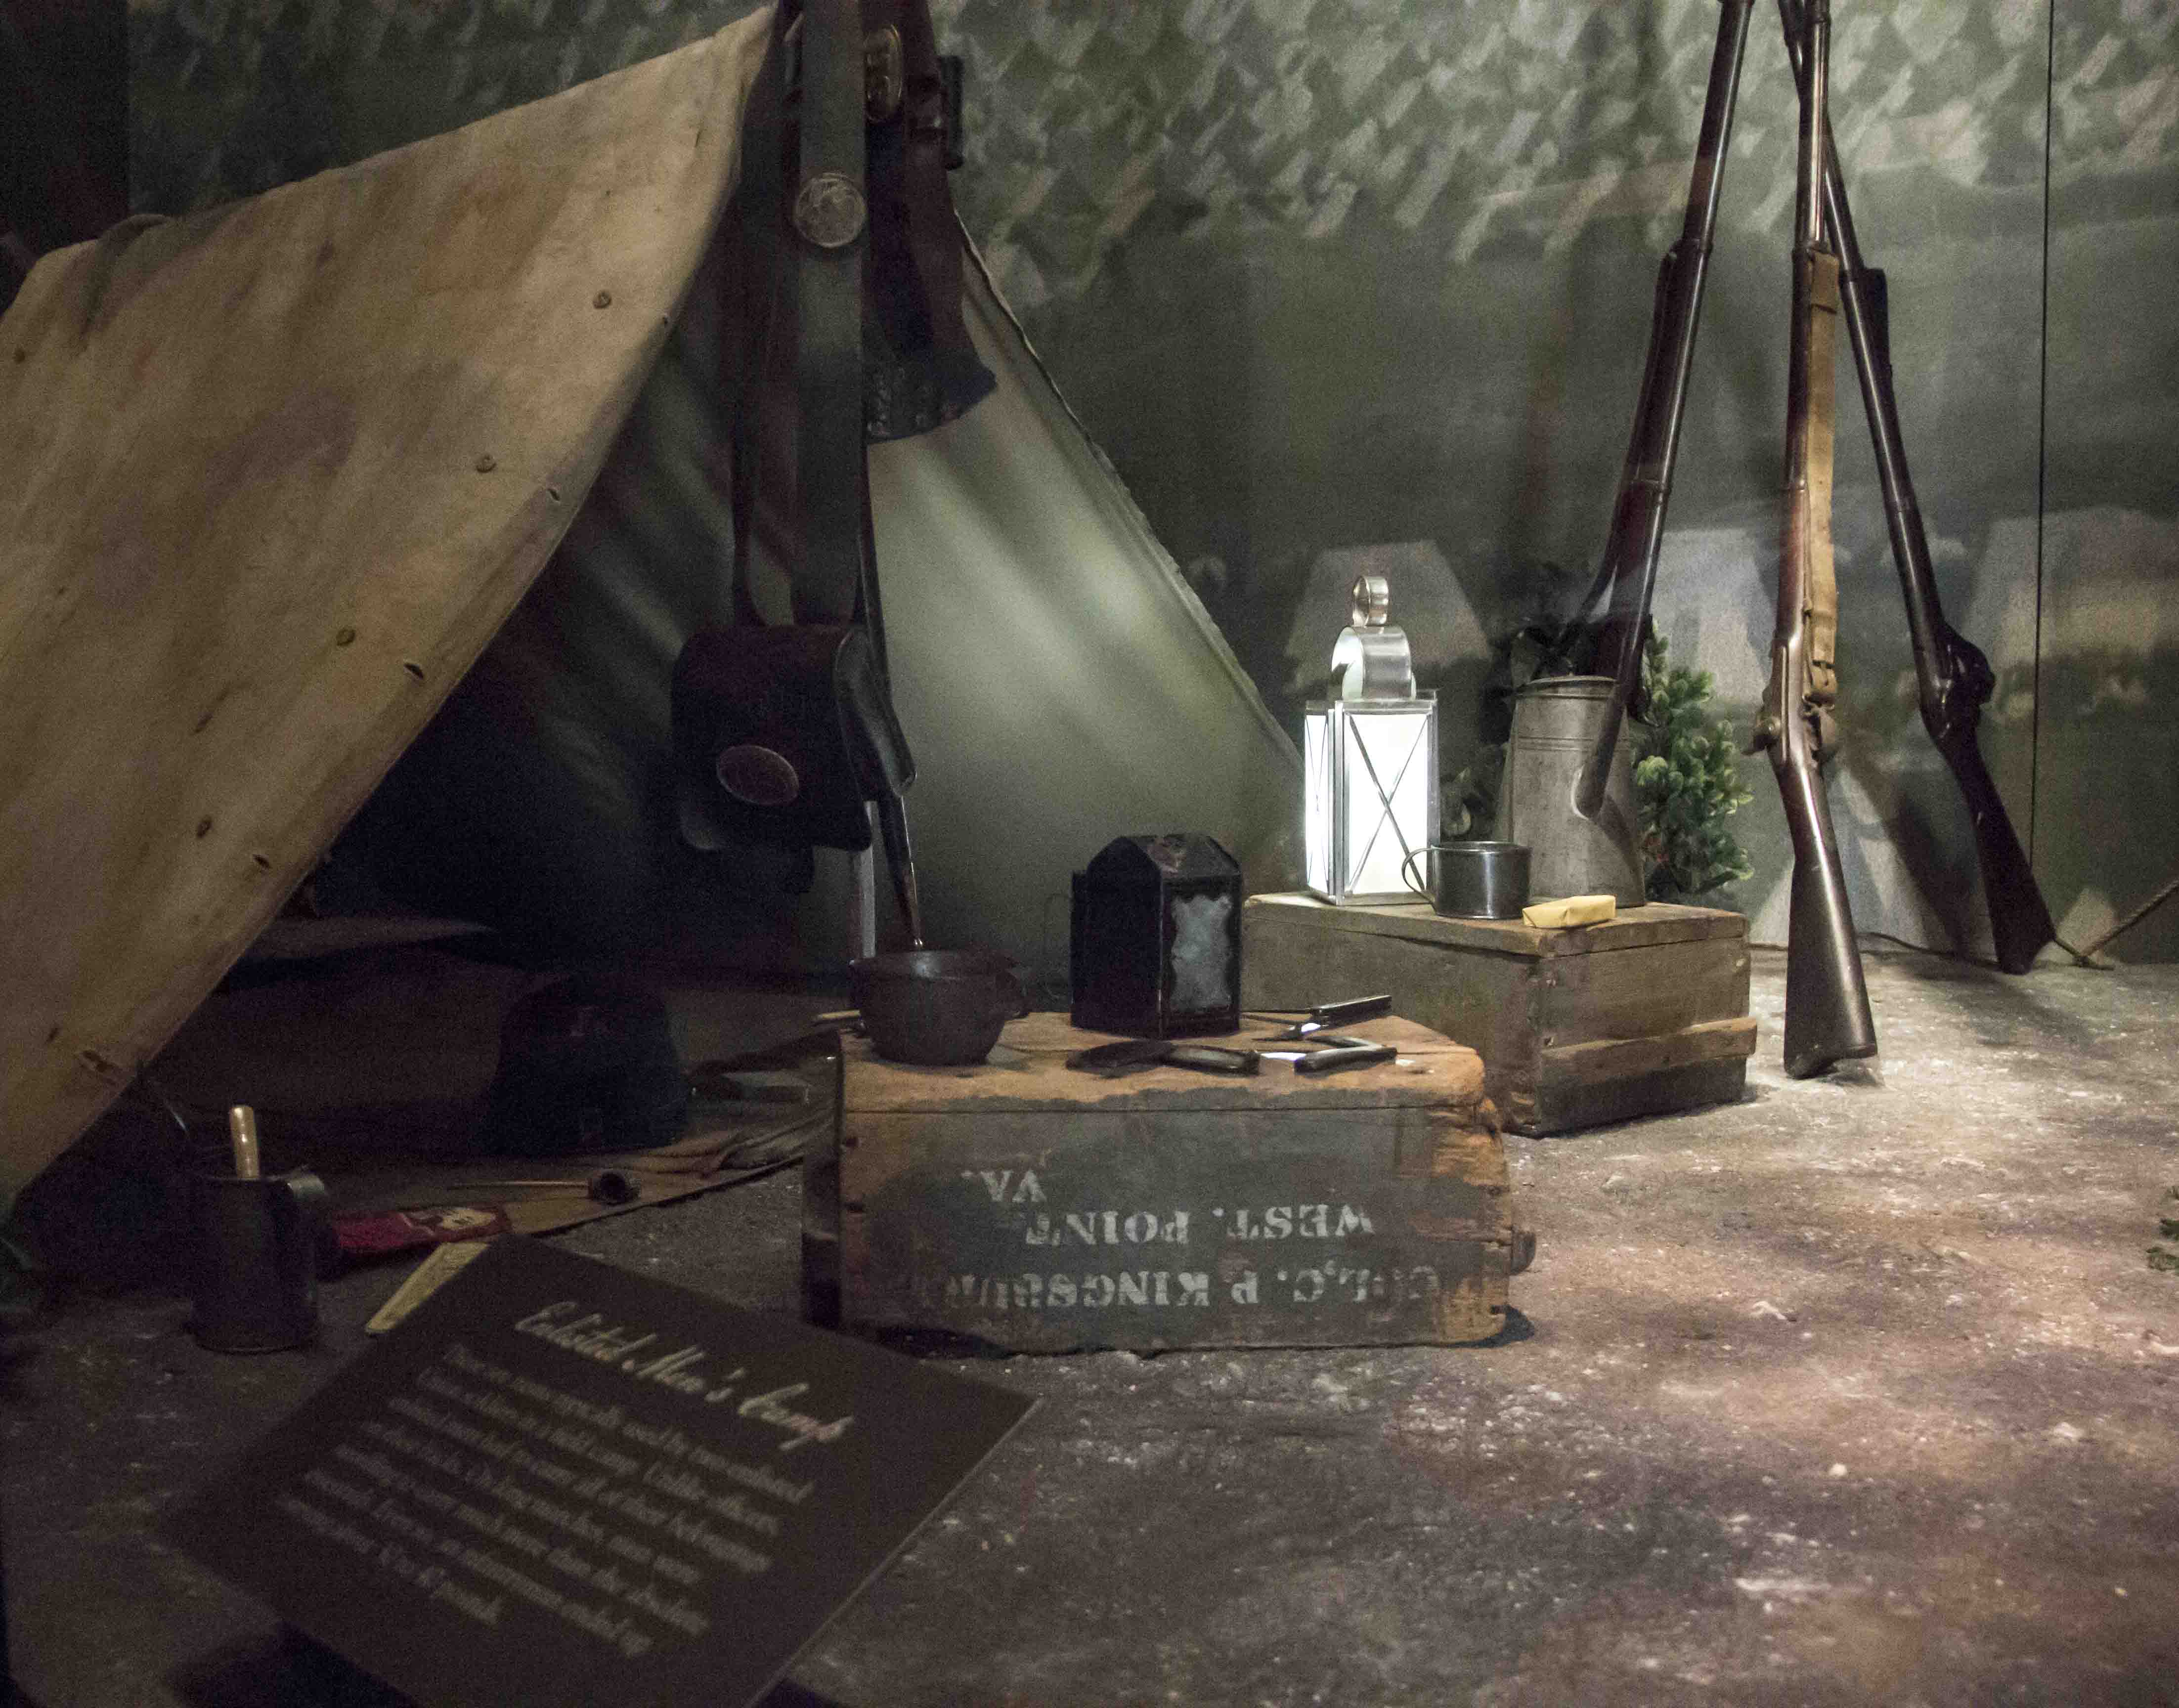 A museum exhibit of camp life depicts a Civil War soldier's tent, lantern, guns, tin cup, tin coffee pot, two wooden boxes, and an interpretive panel.